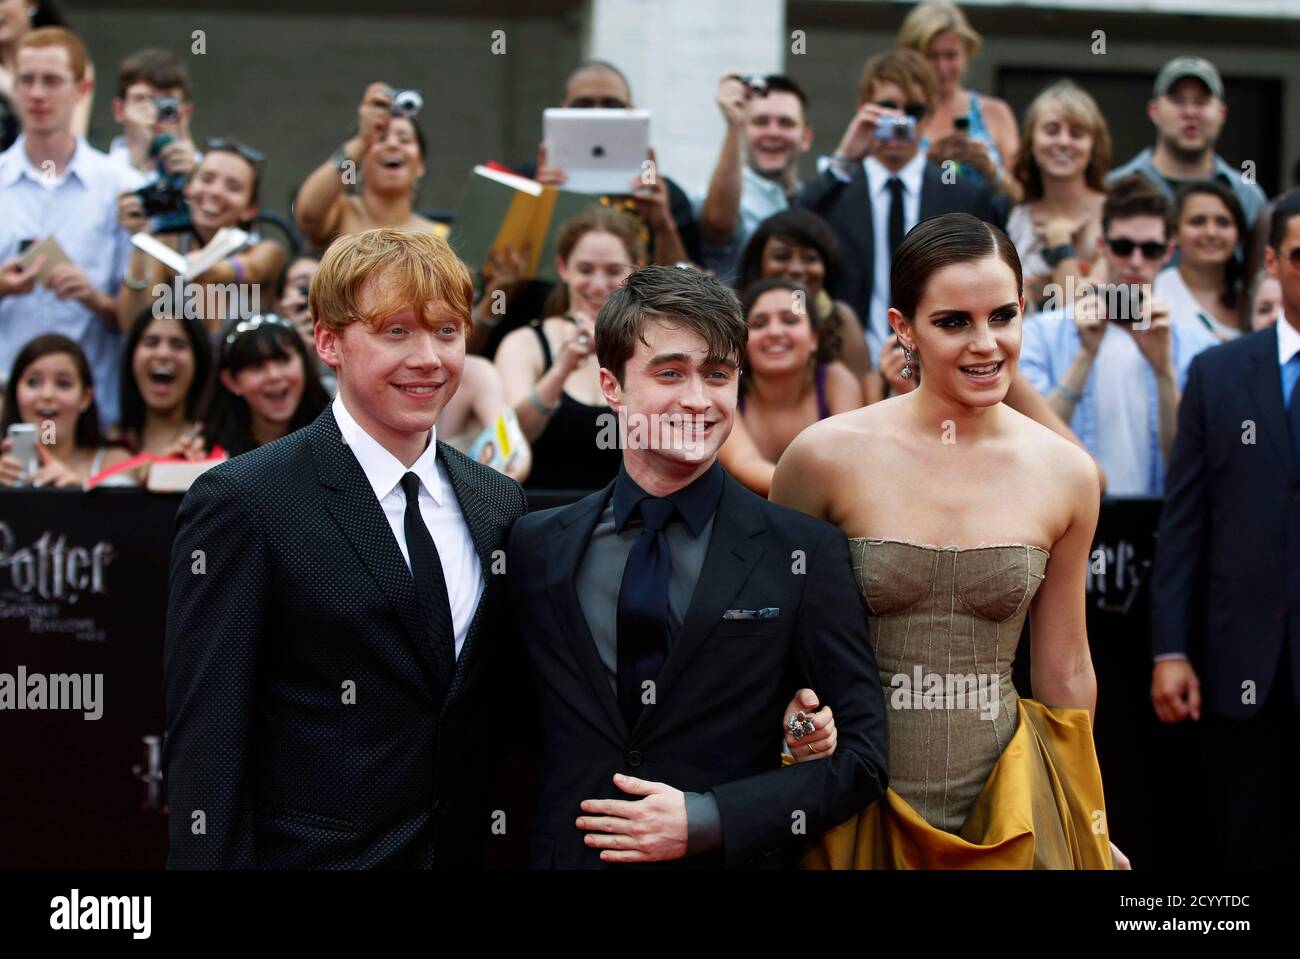 harry potter and the deathly hallows part 2 cast